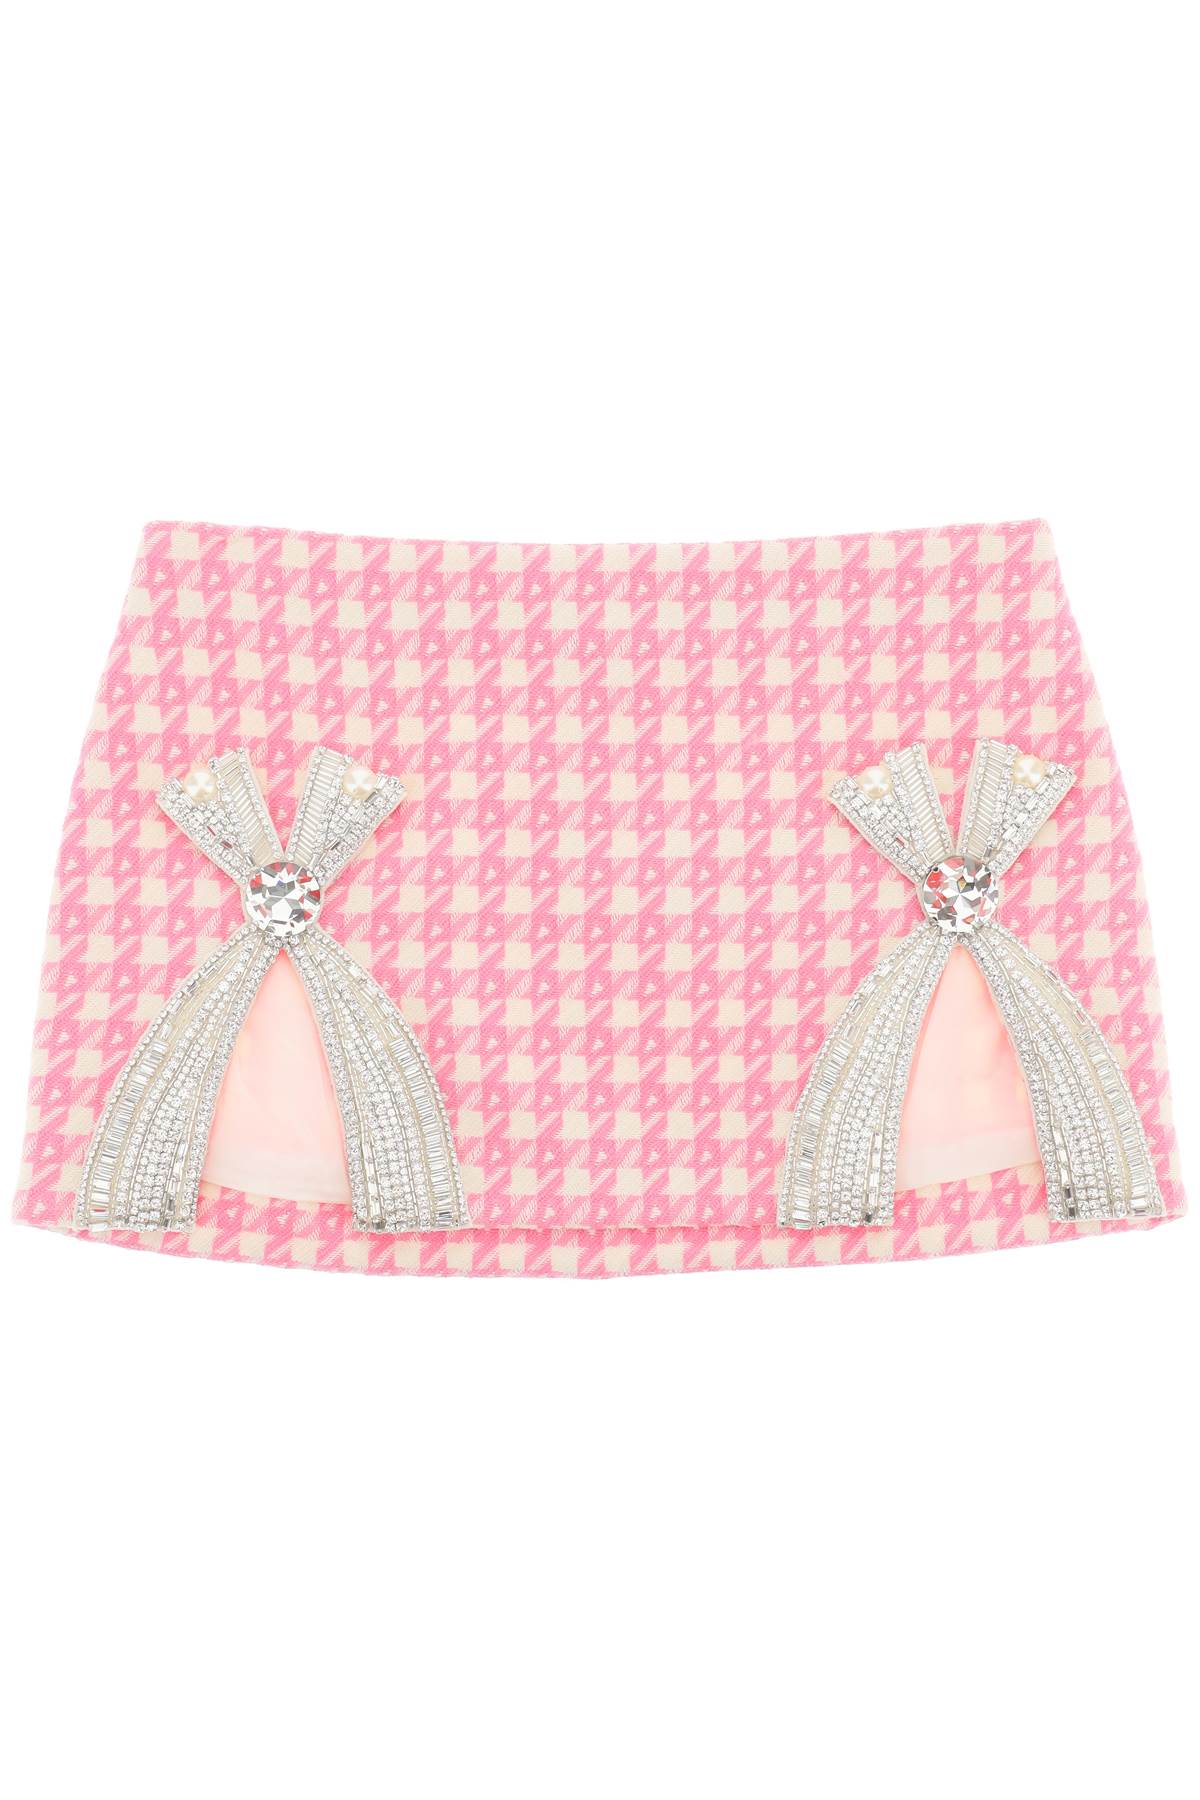 AREA Mini Skirt With Jewel Bows